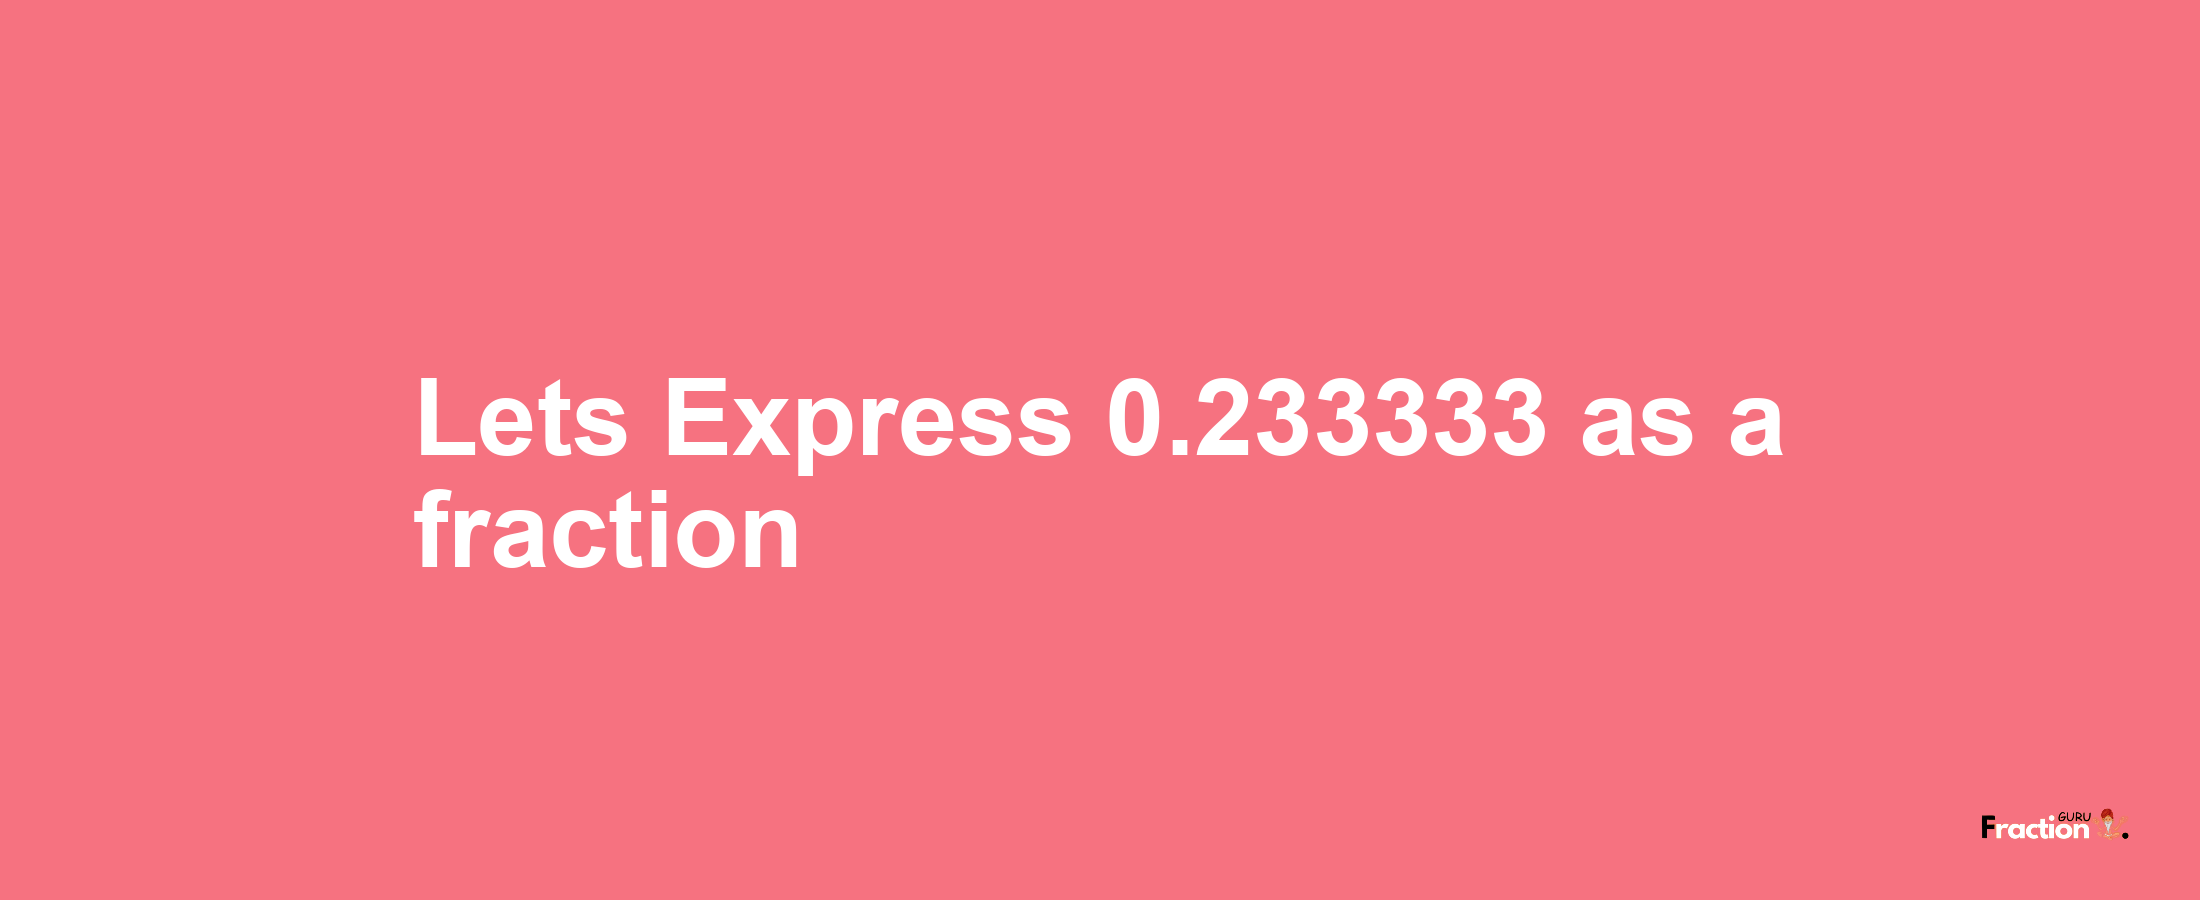 Lets Express 0.233333 as afraction